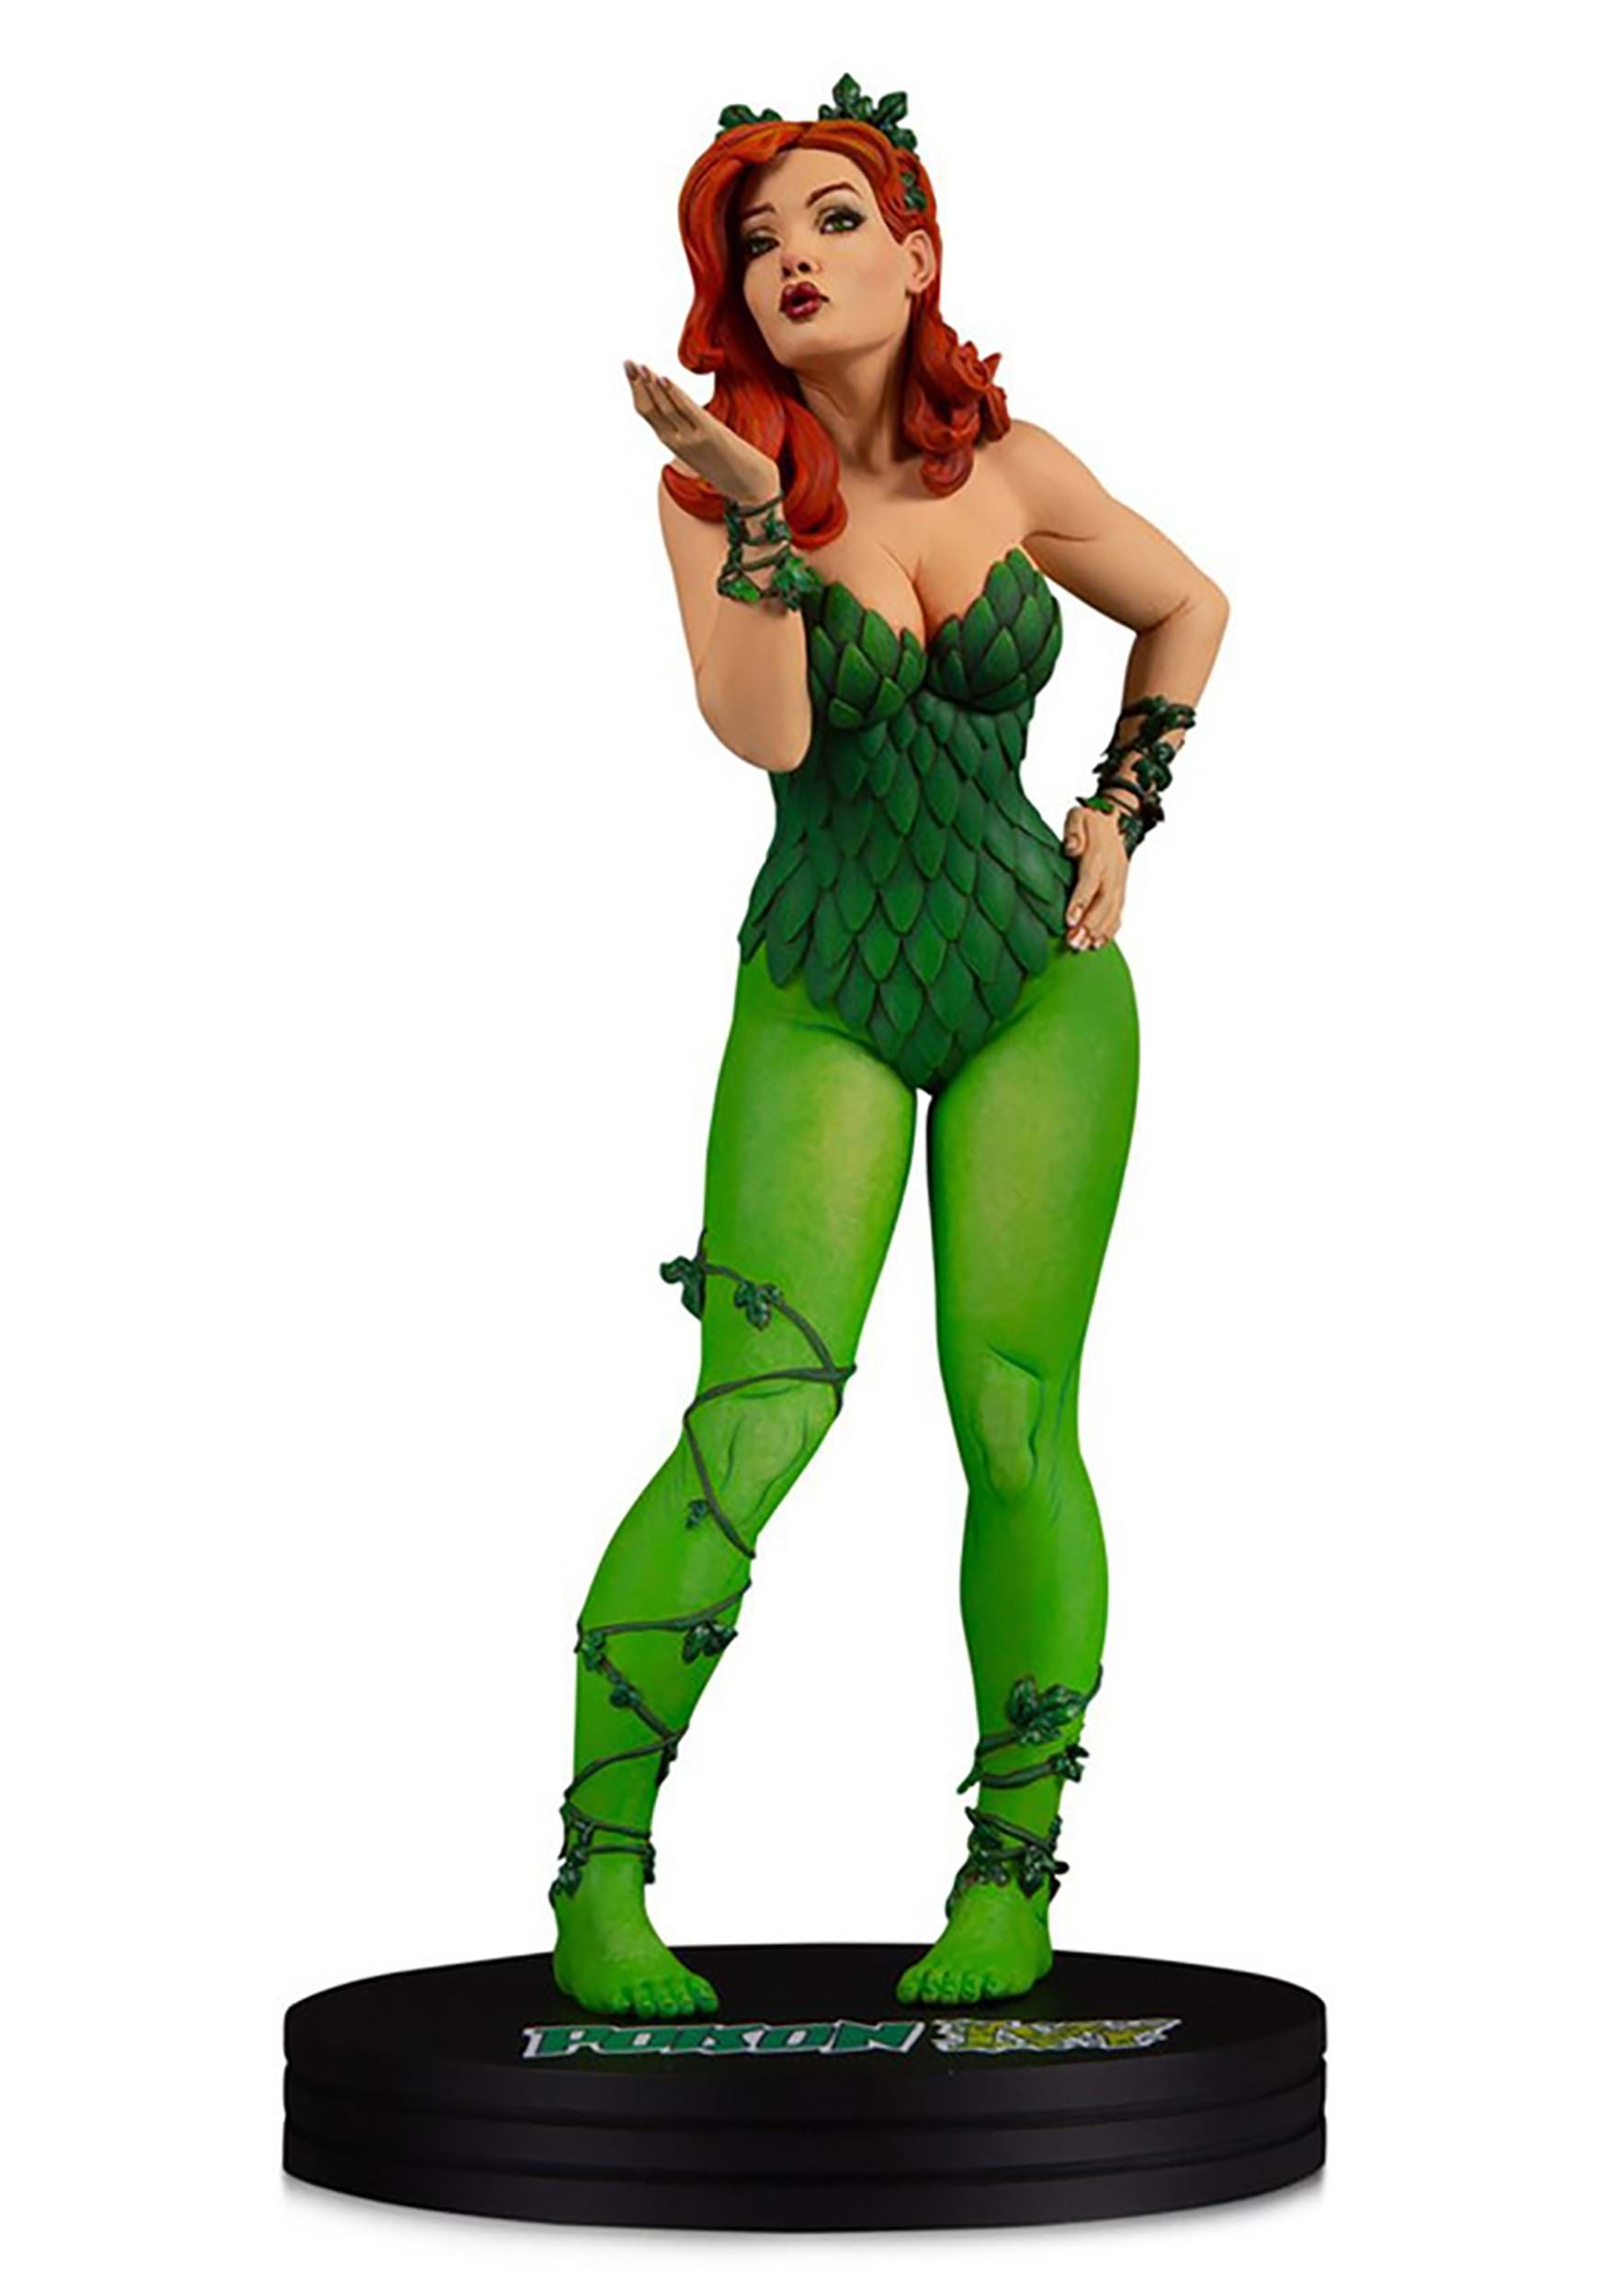 McFarlane DC Cover Girls Poison Ivy Statue by Frank Cho